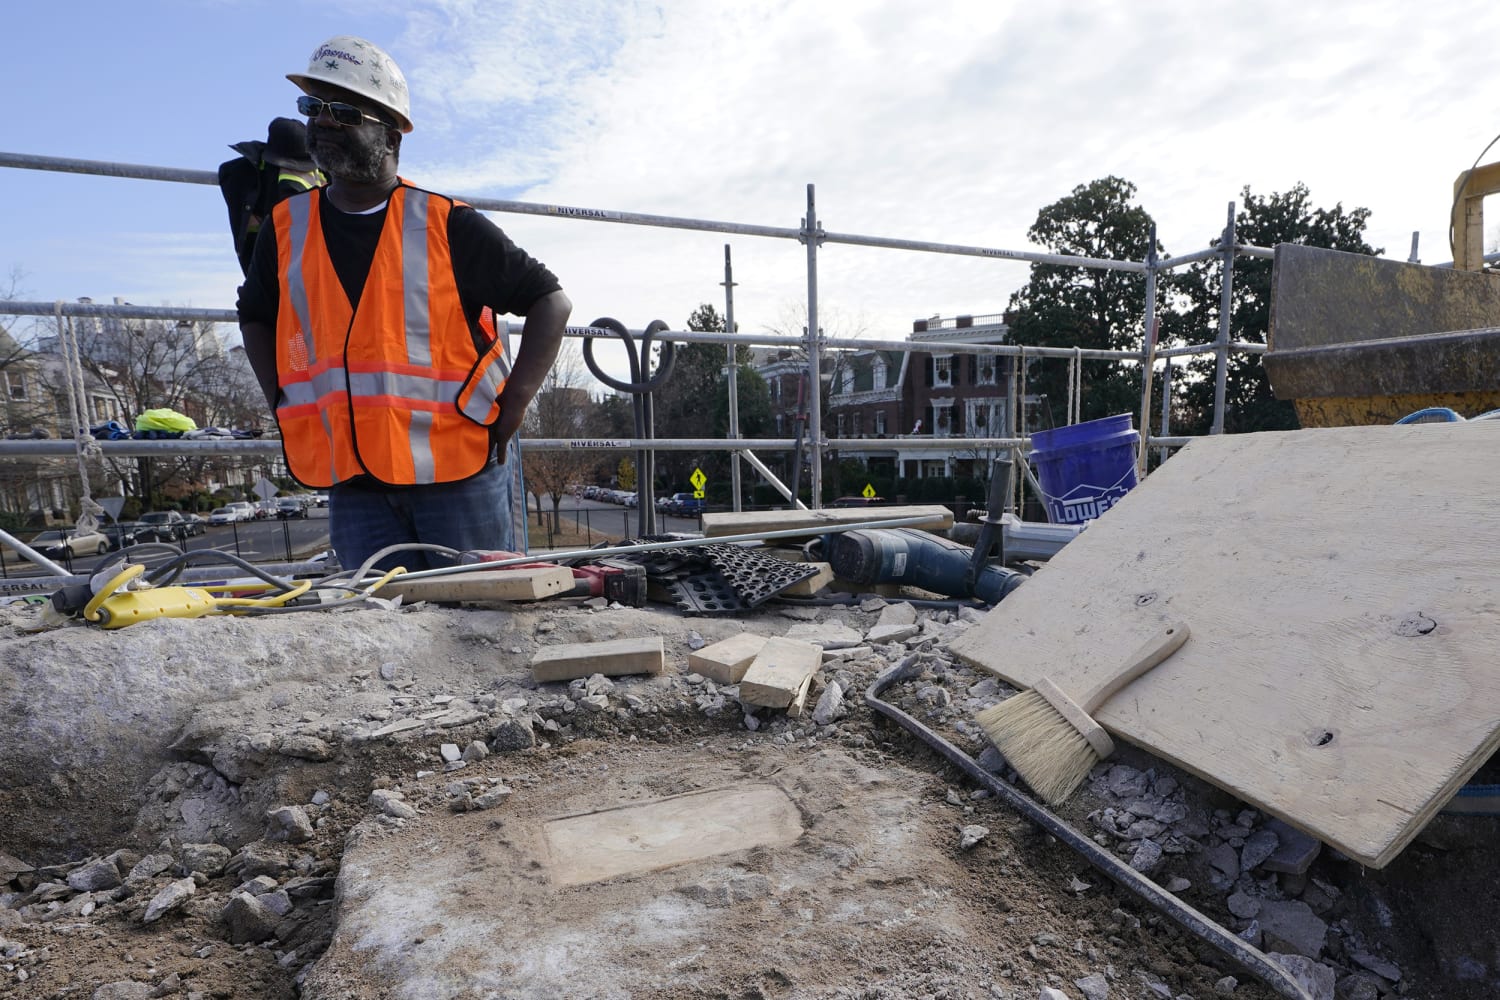 Crews may have found 1887 time capsule in Robert E. Lee statue pedestal